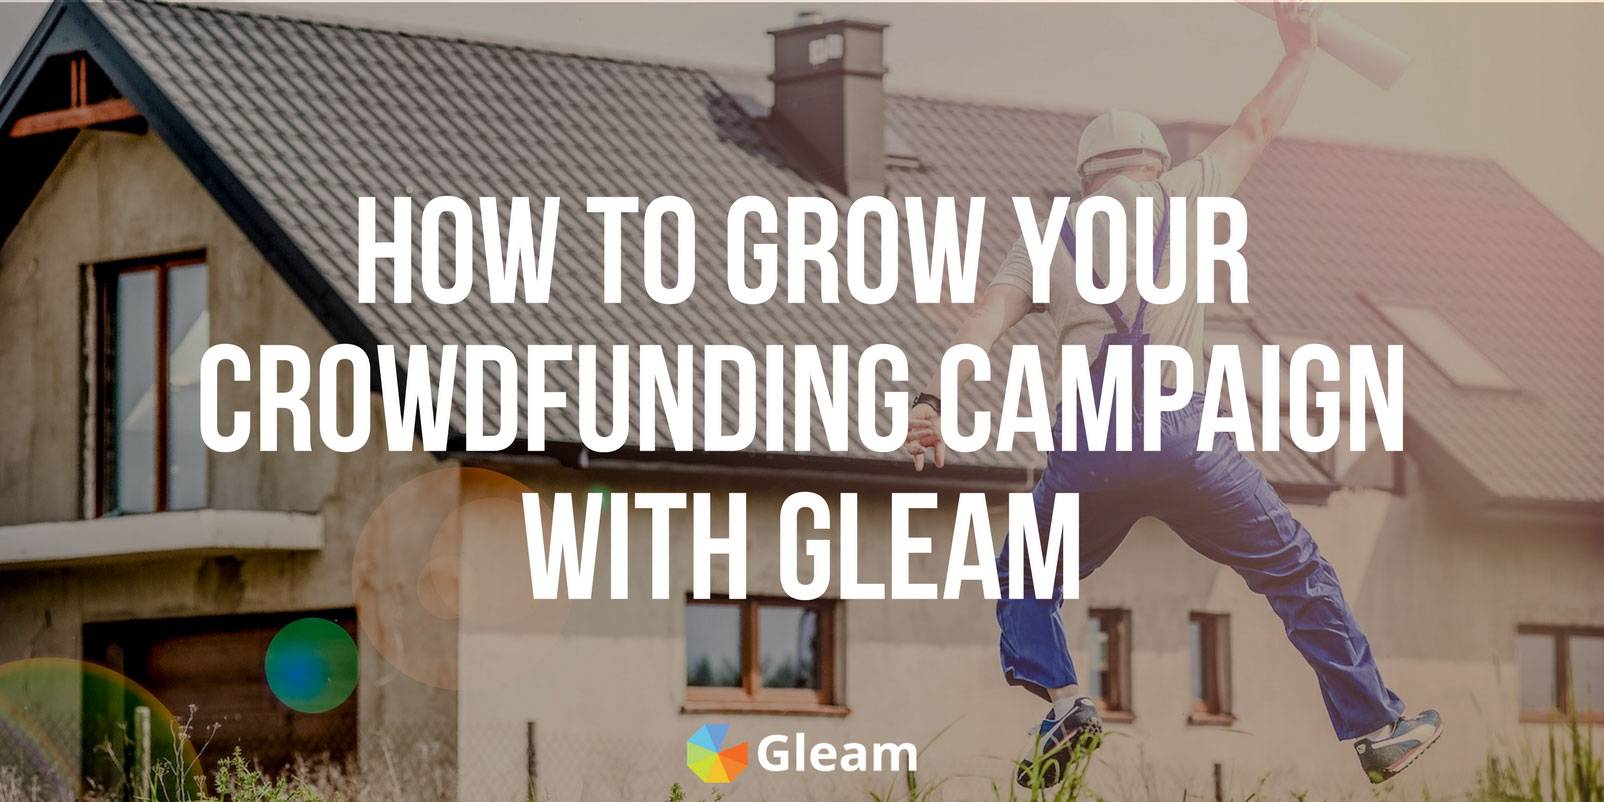 How to Grow Your Crowdfunding Campaign with Gleam